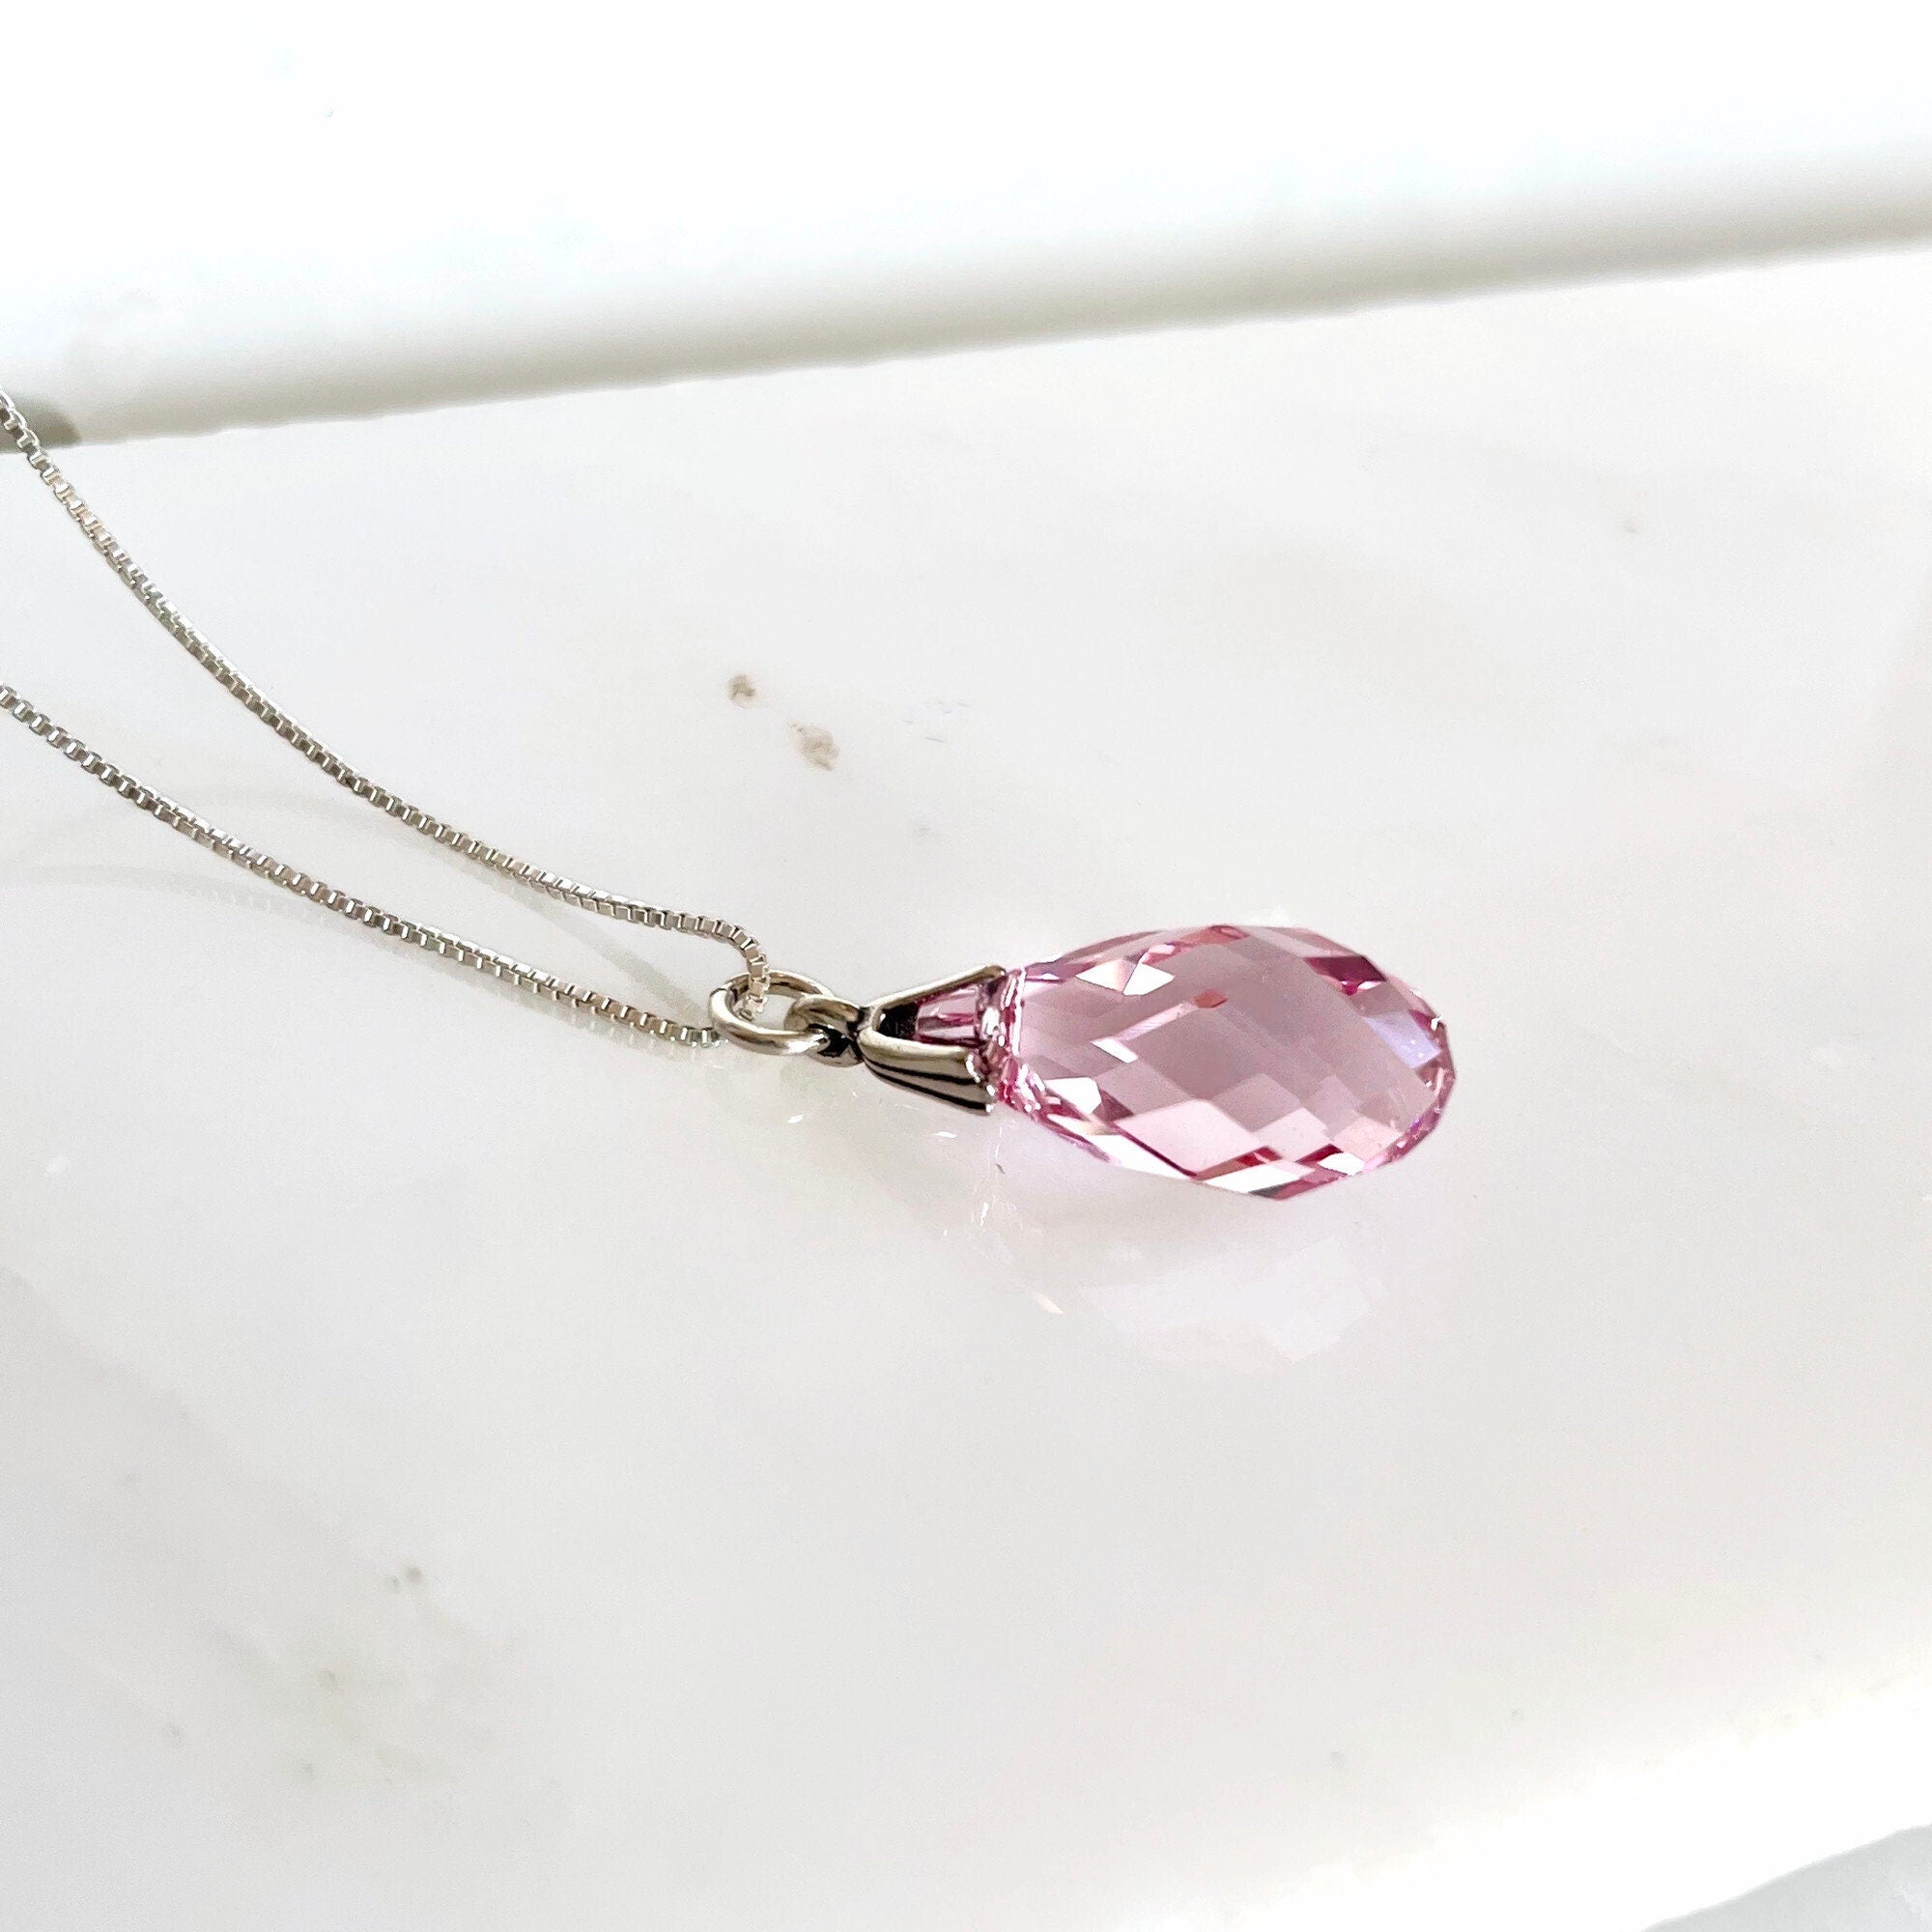 Silver Plated With Light Pink Crystal Necklace With Earrings | B204-BL-12 |  Cilory.com